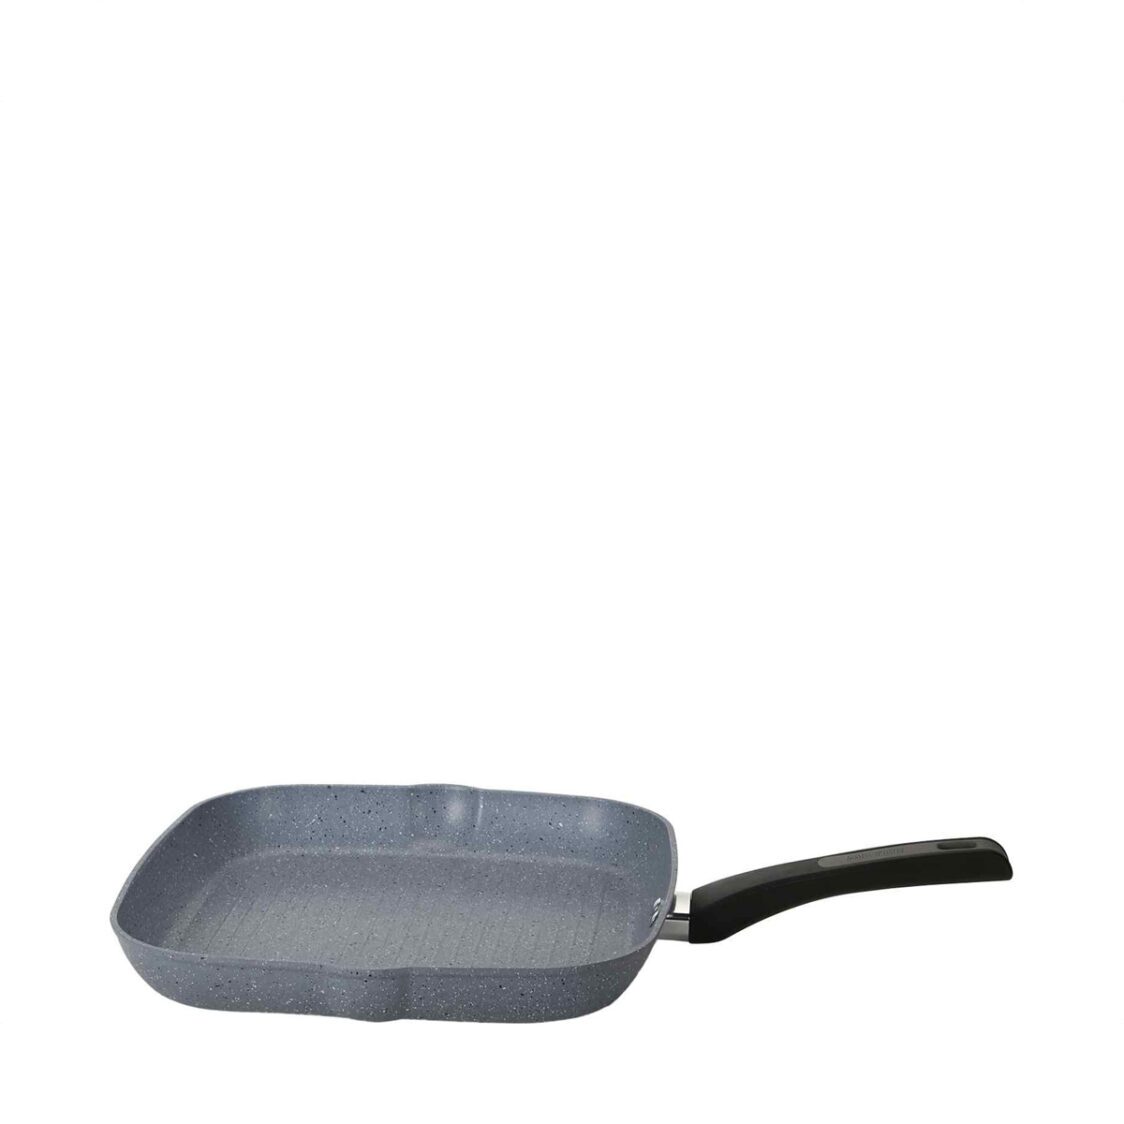 Meyer Forgestone 28cm Square Griddle Pan 19105